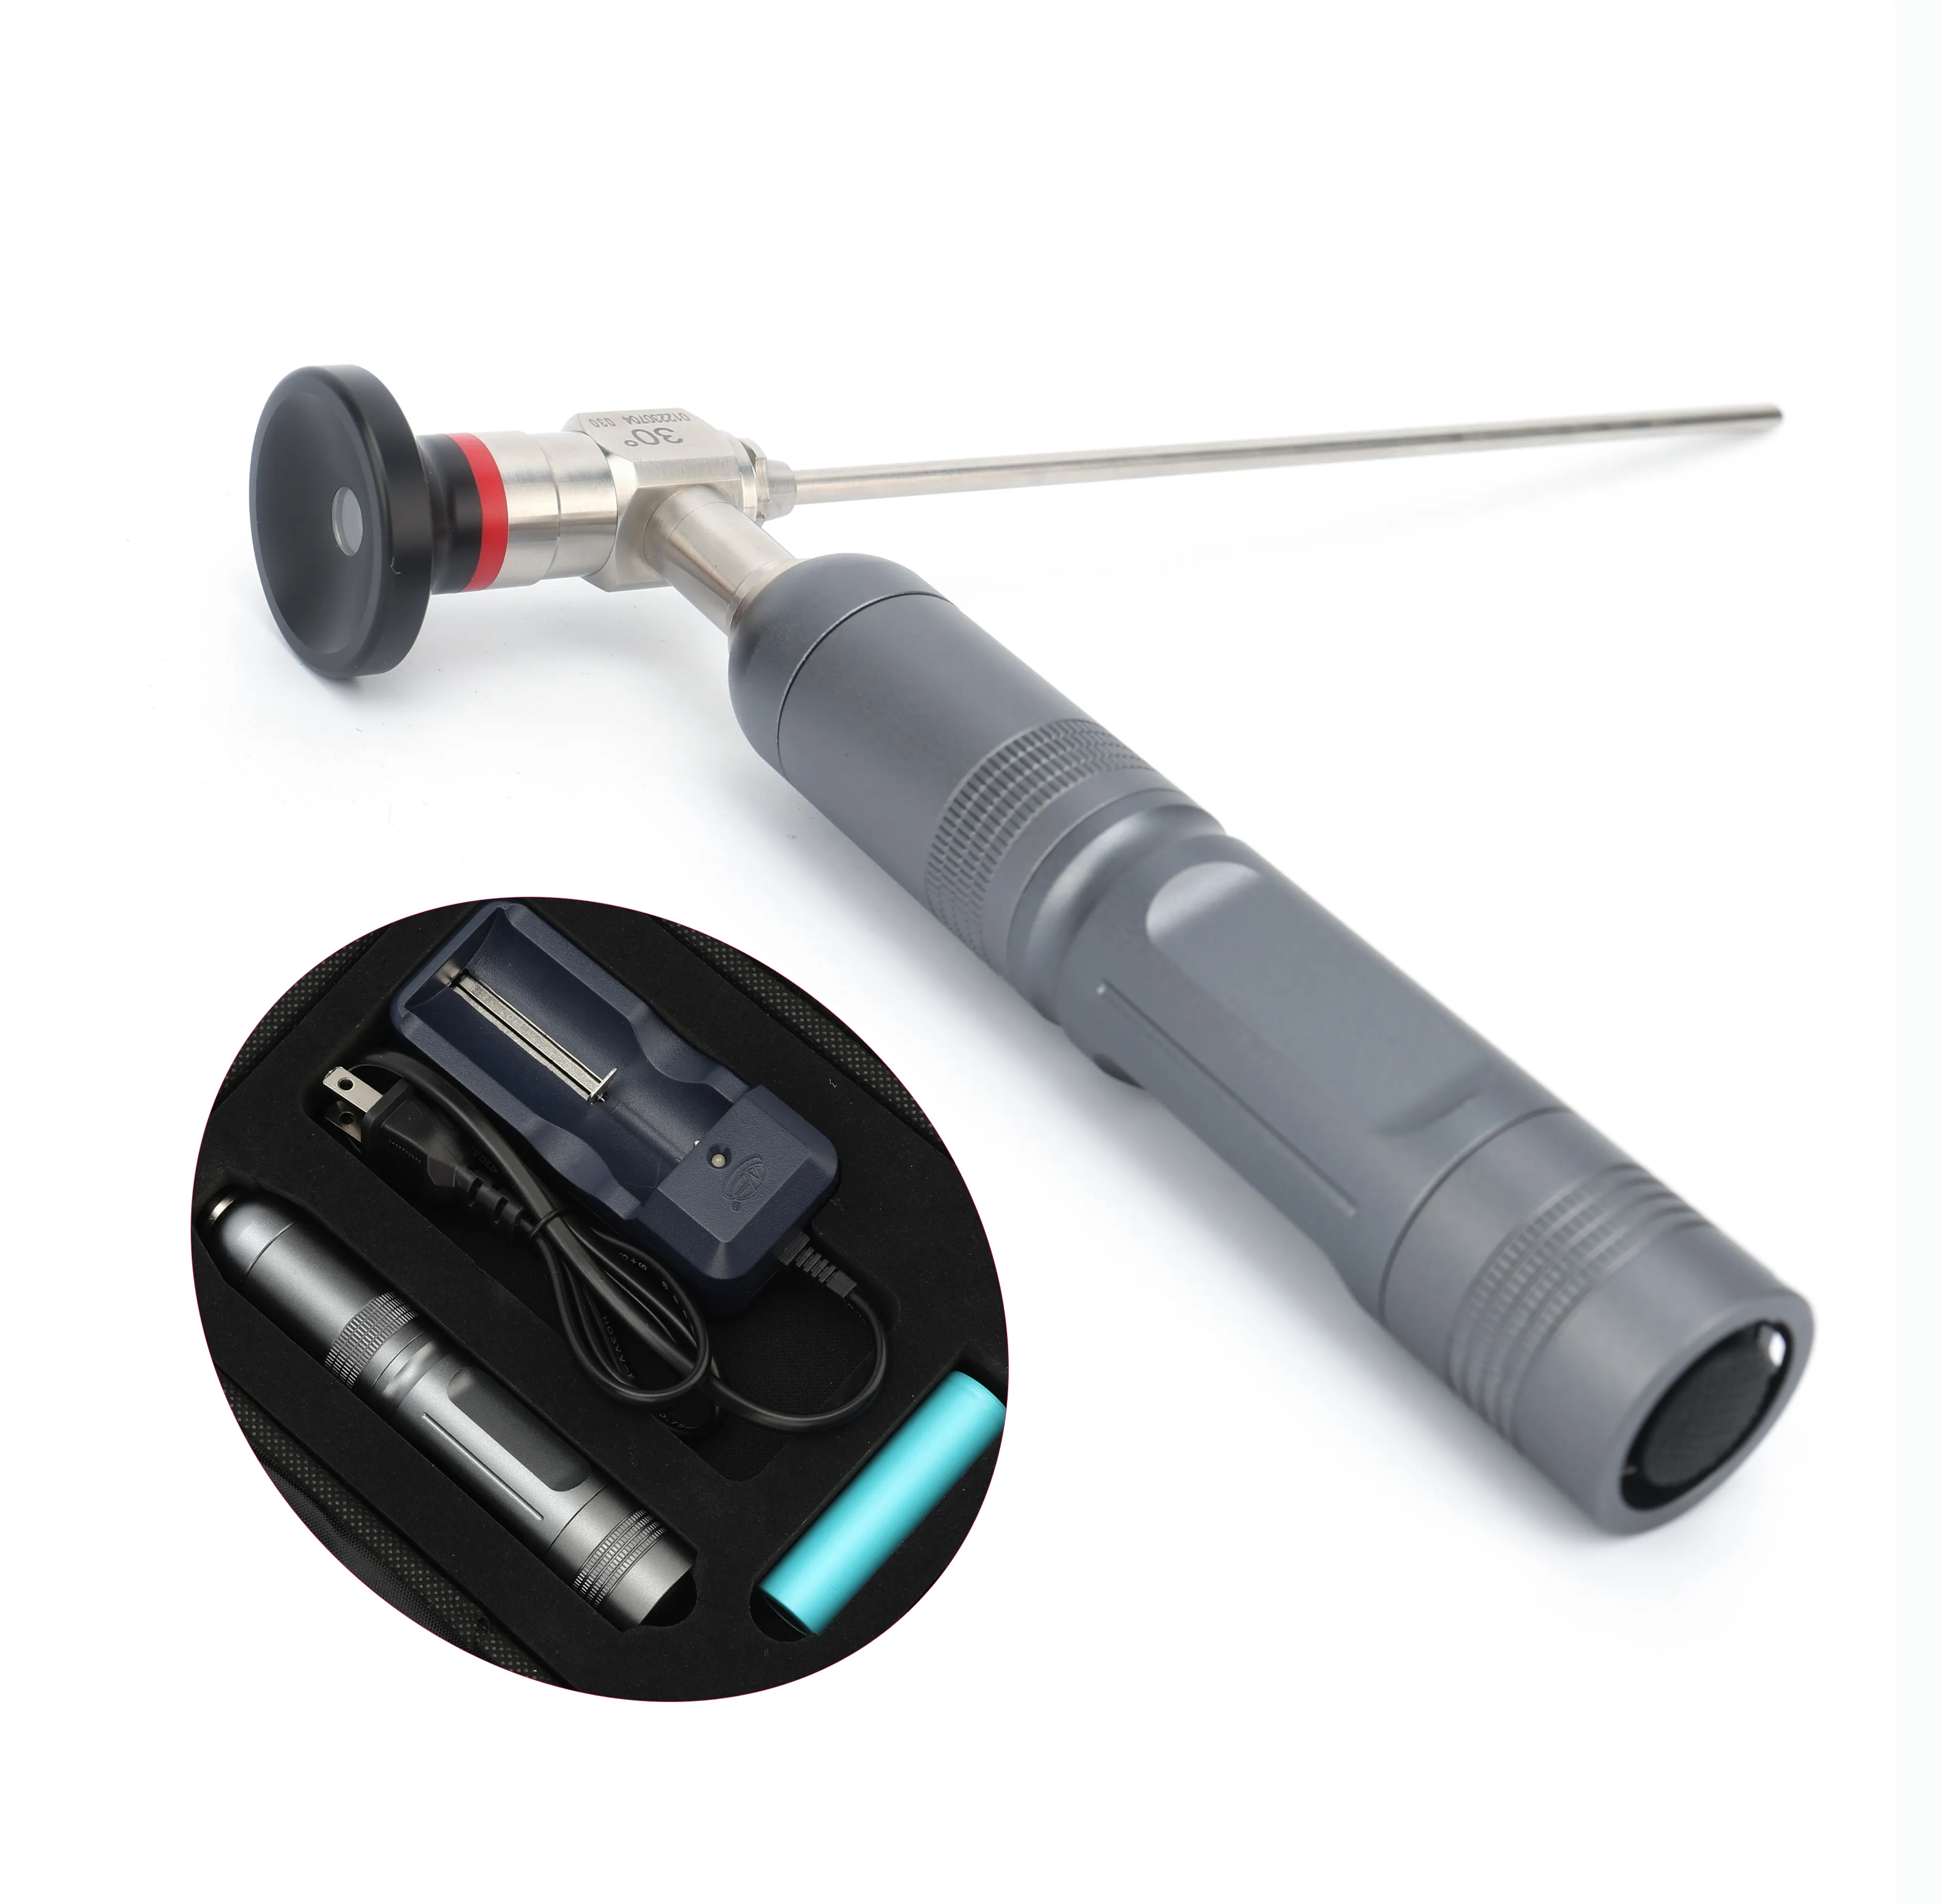 Source lumineuse LED endoscope portable, source lumineuse chirurgicale rechargeable